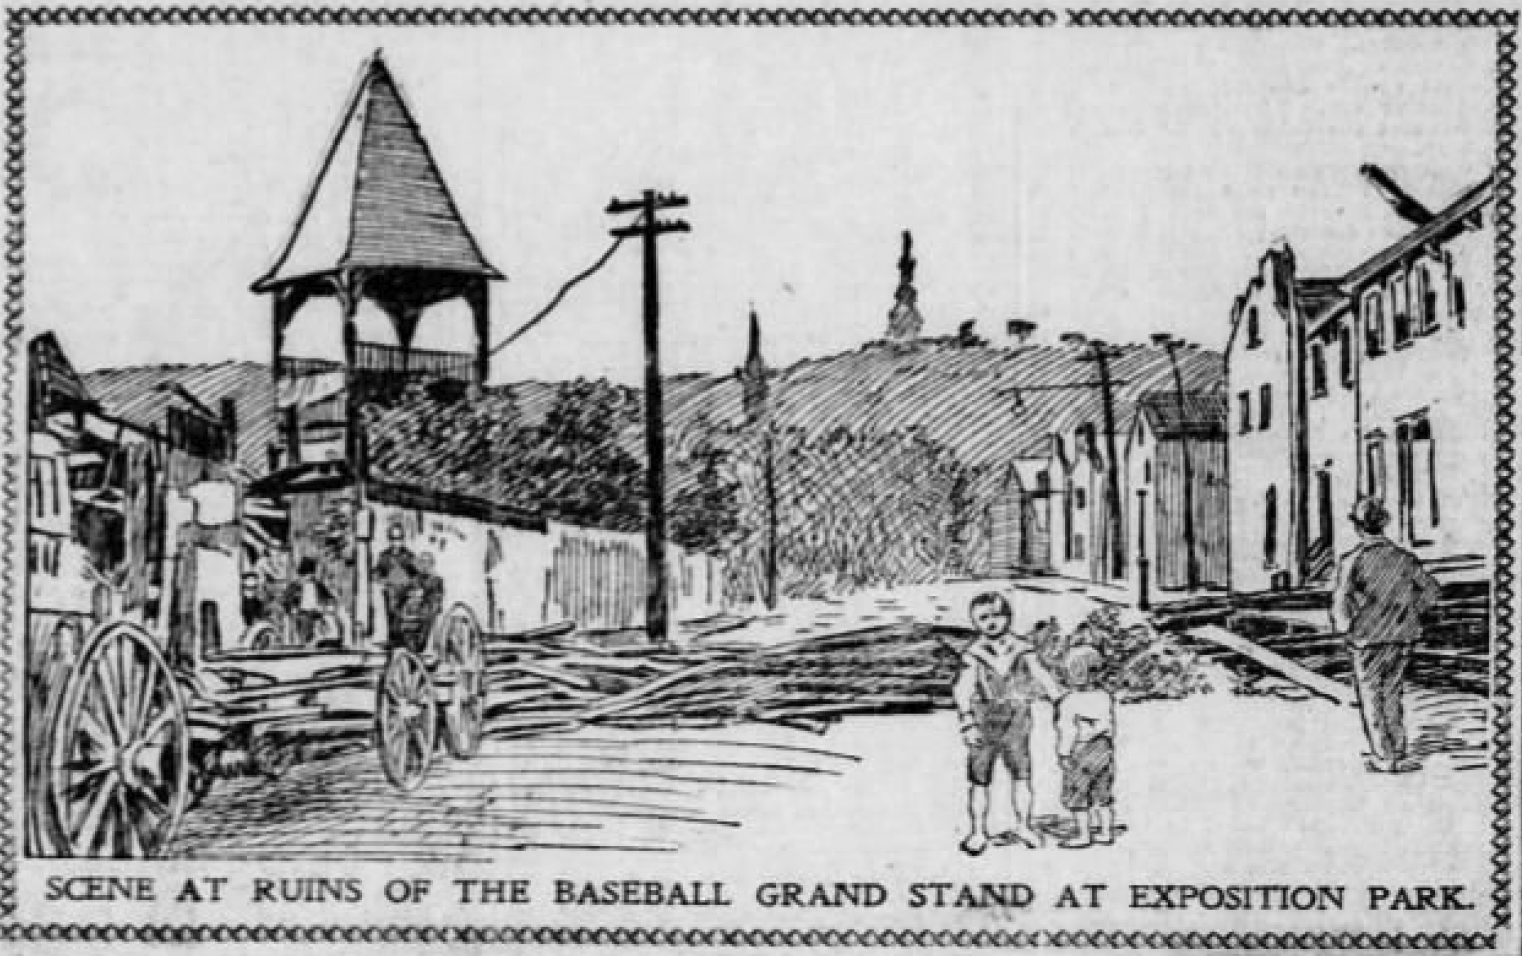 Exposition Park in Post 1914